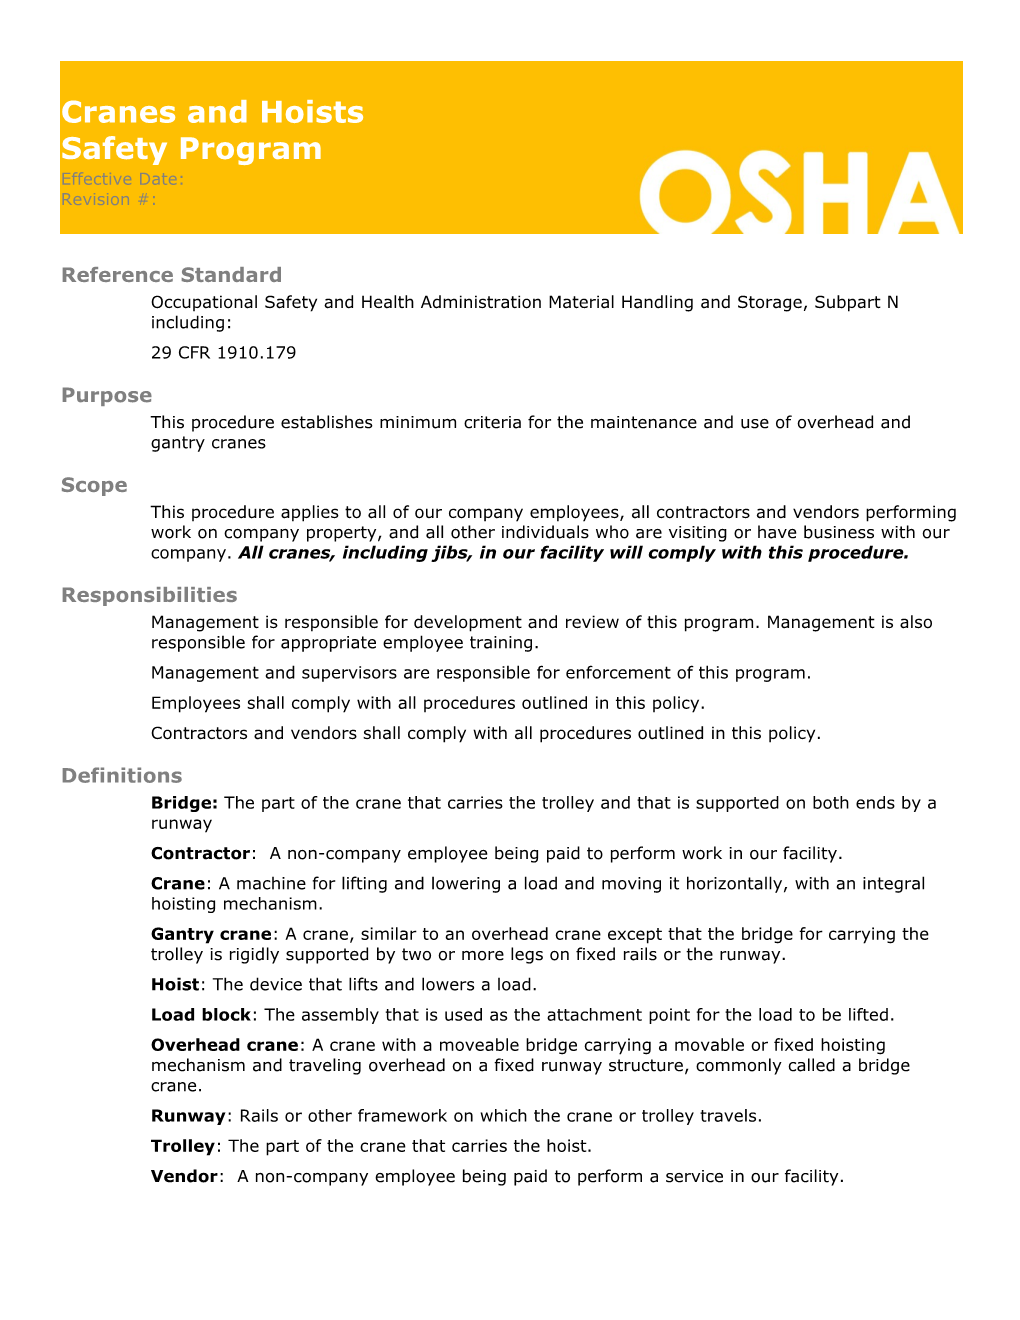 Occupational Safety and Health Administration Material Handling and Storage, Subpart N